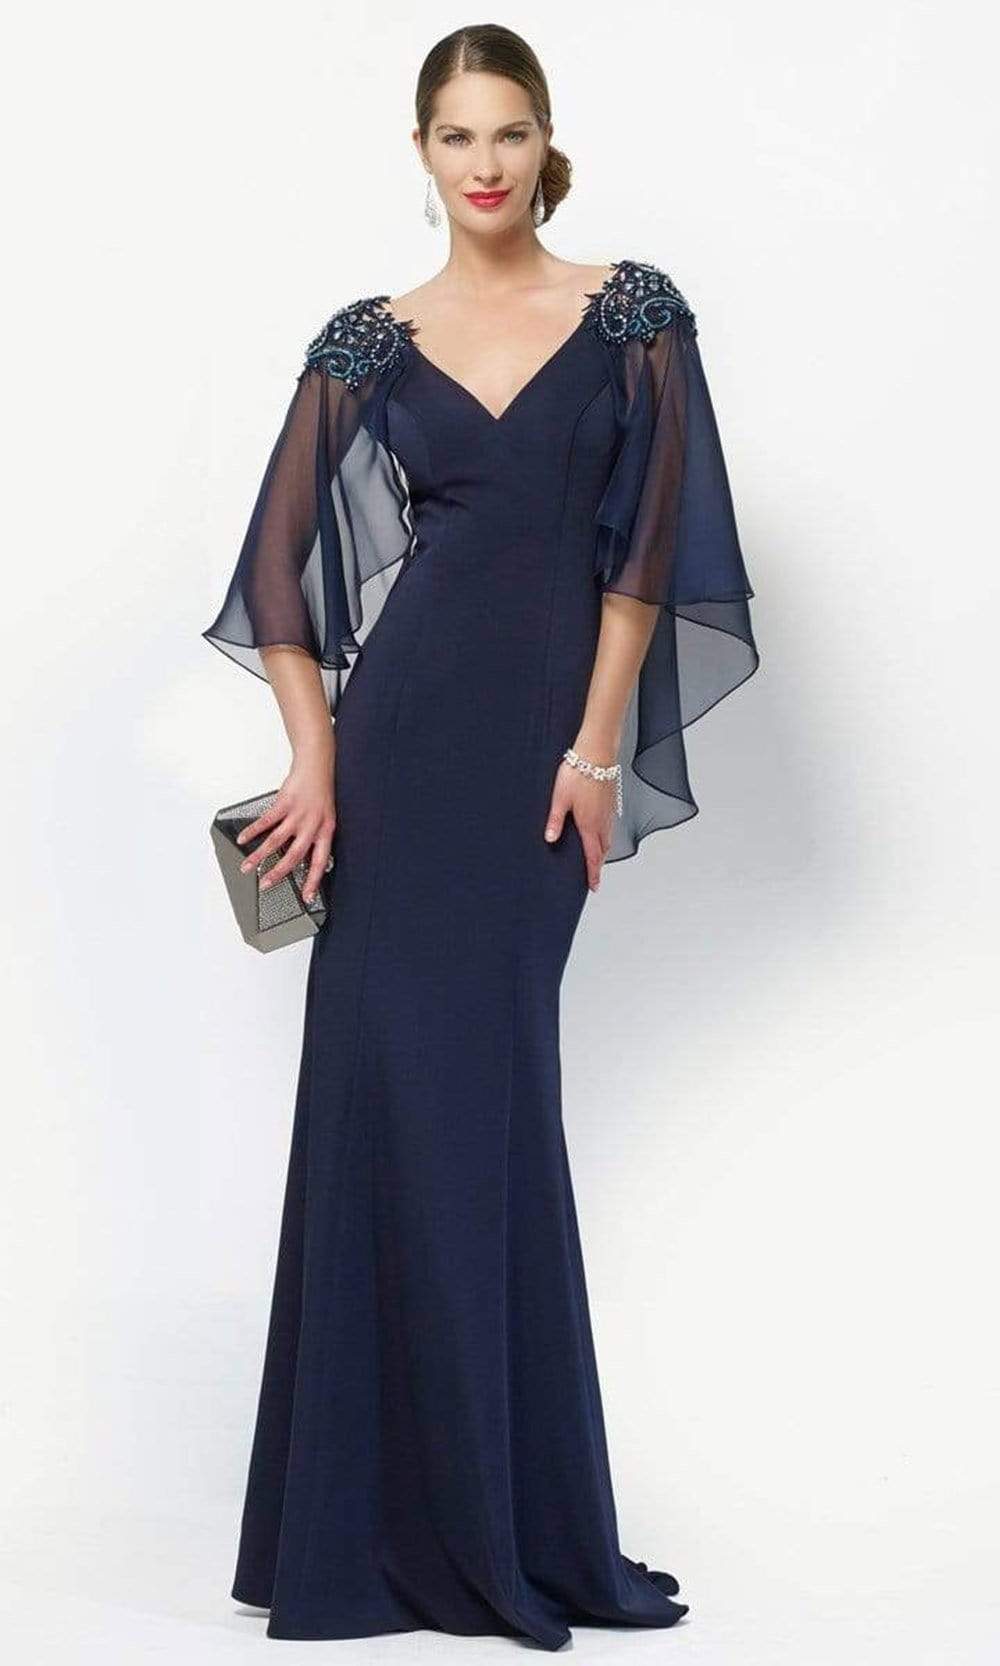 Alyce Paris - 27170 Beaded V-Neck Gown with Sheer Capelet
